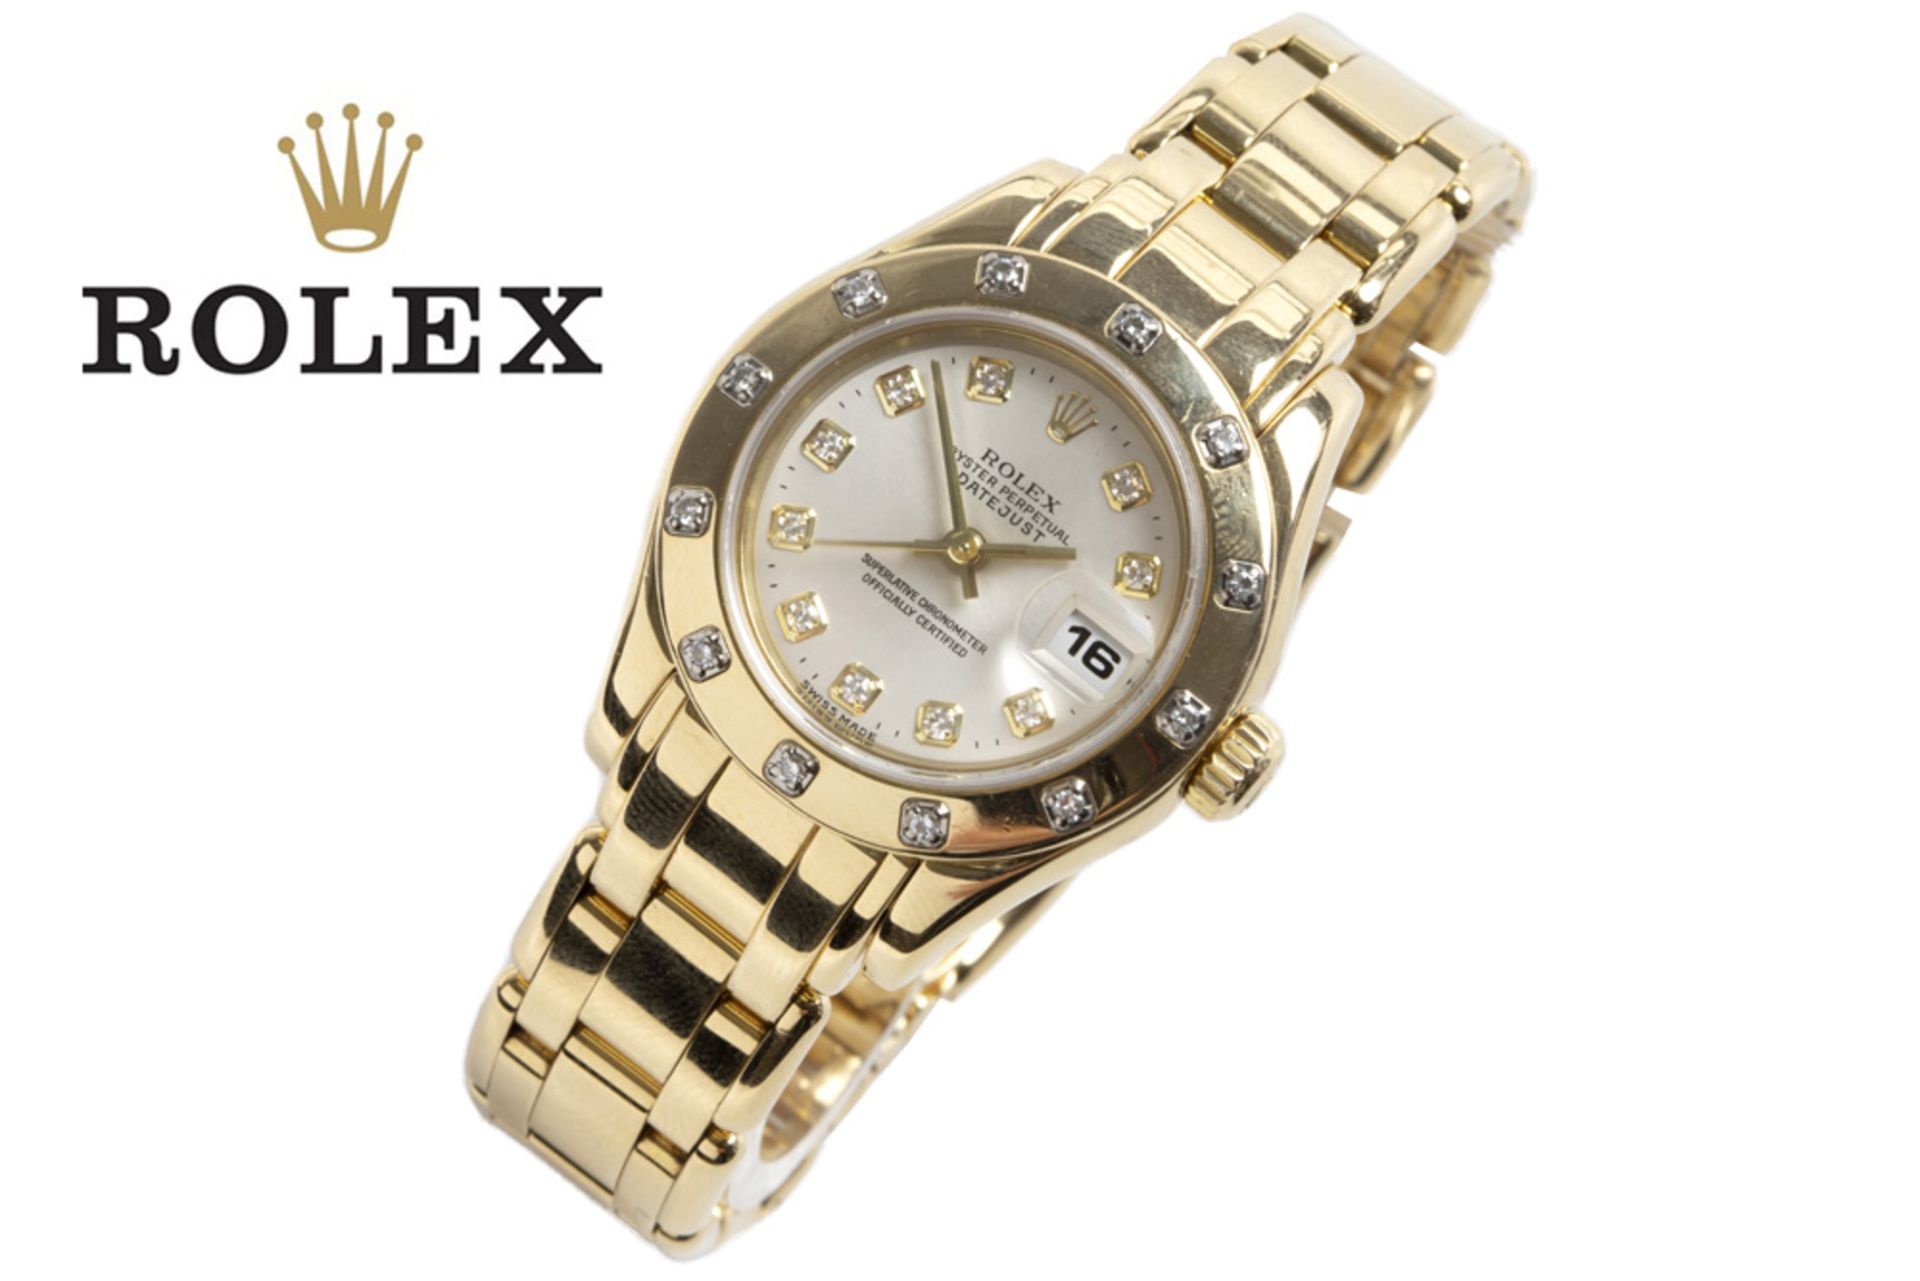 completely original Rolex marked automatic "Pearlmaster" ladies' wristwatch in yellow gold (18